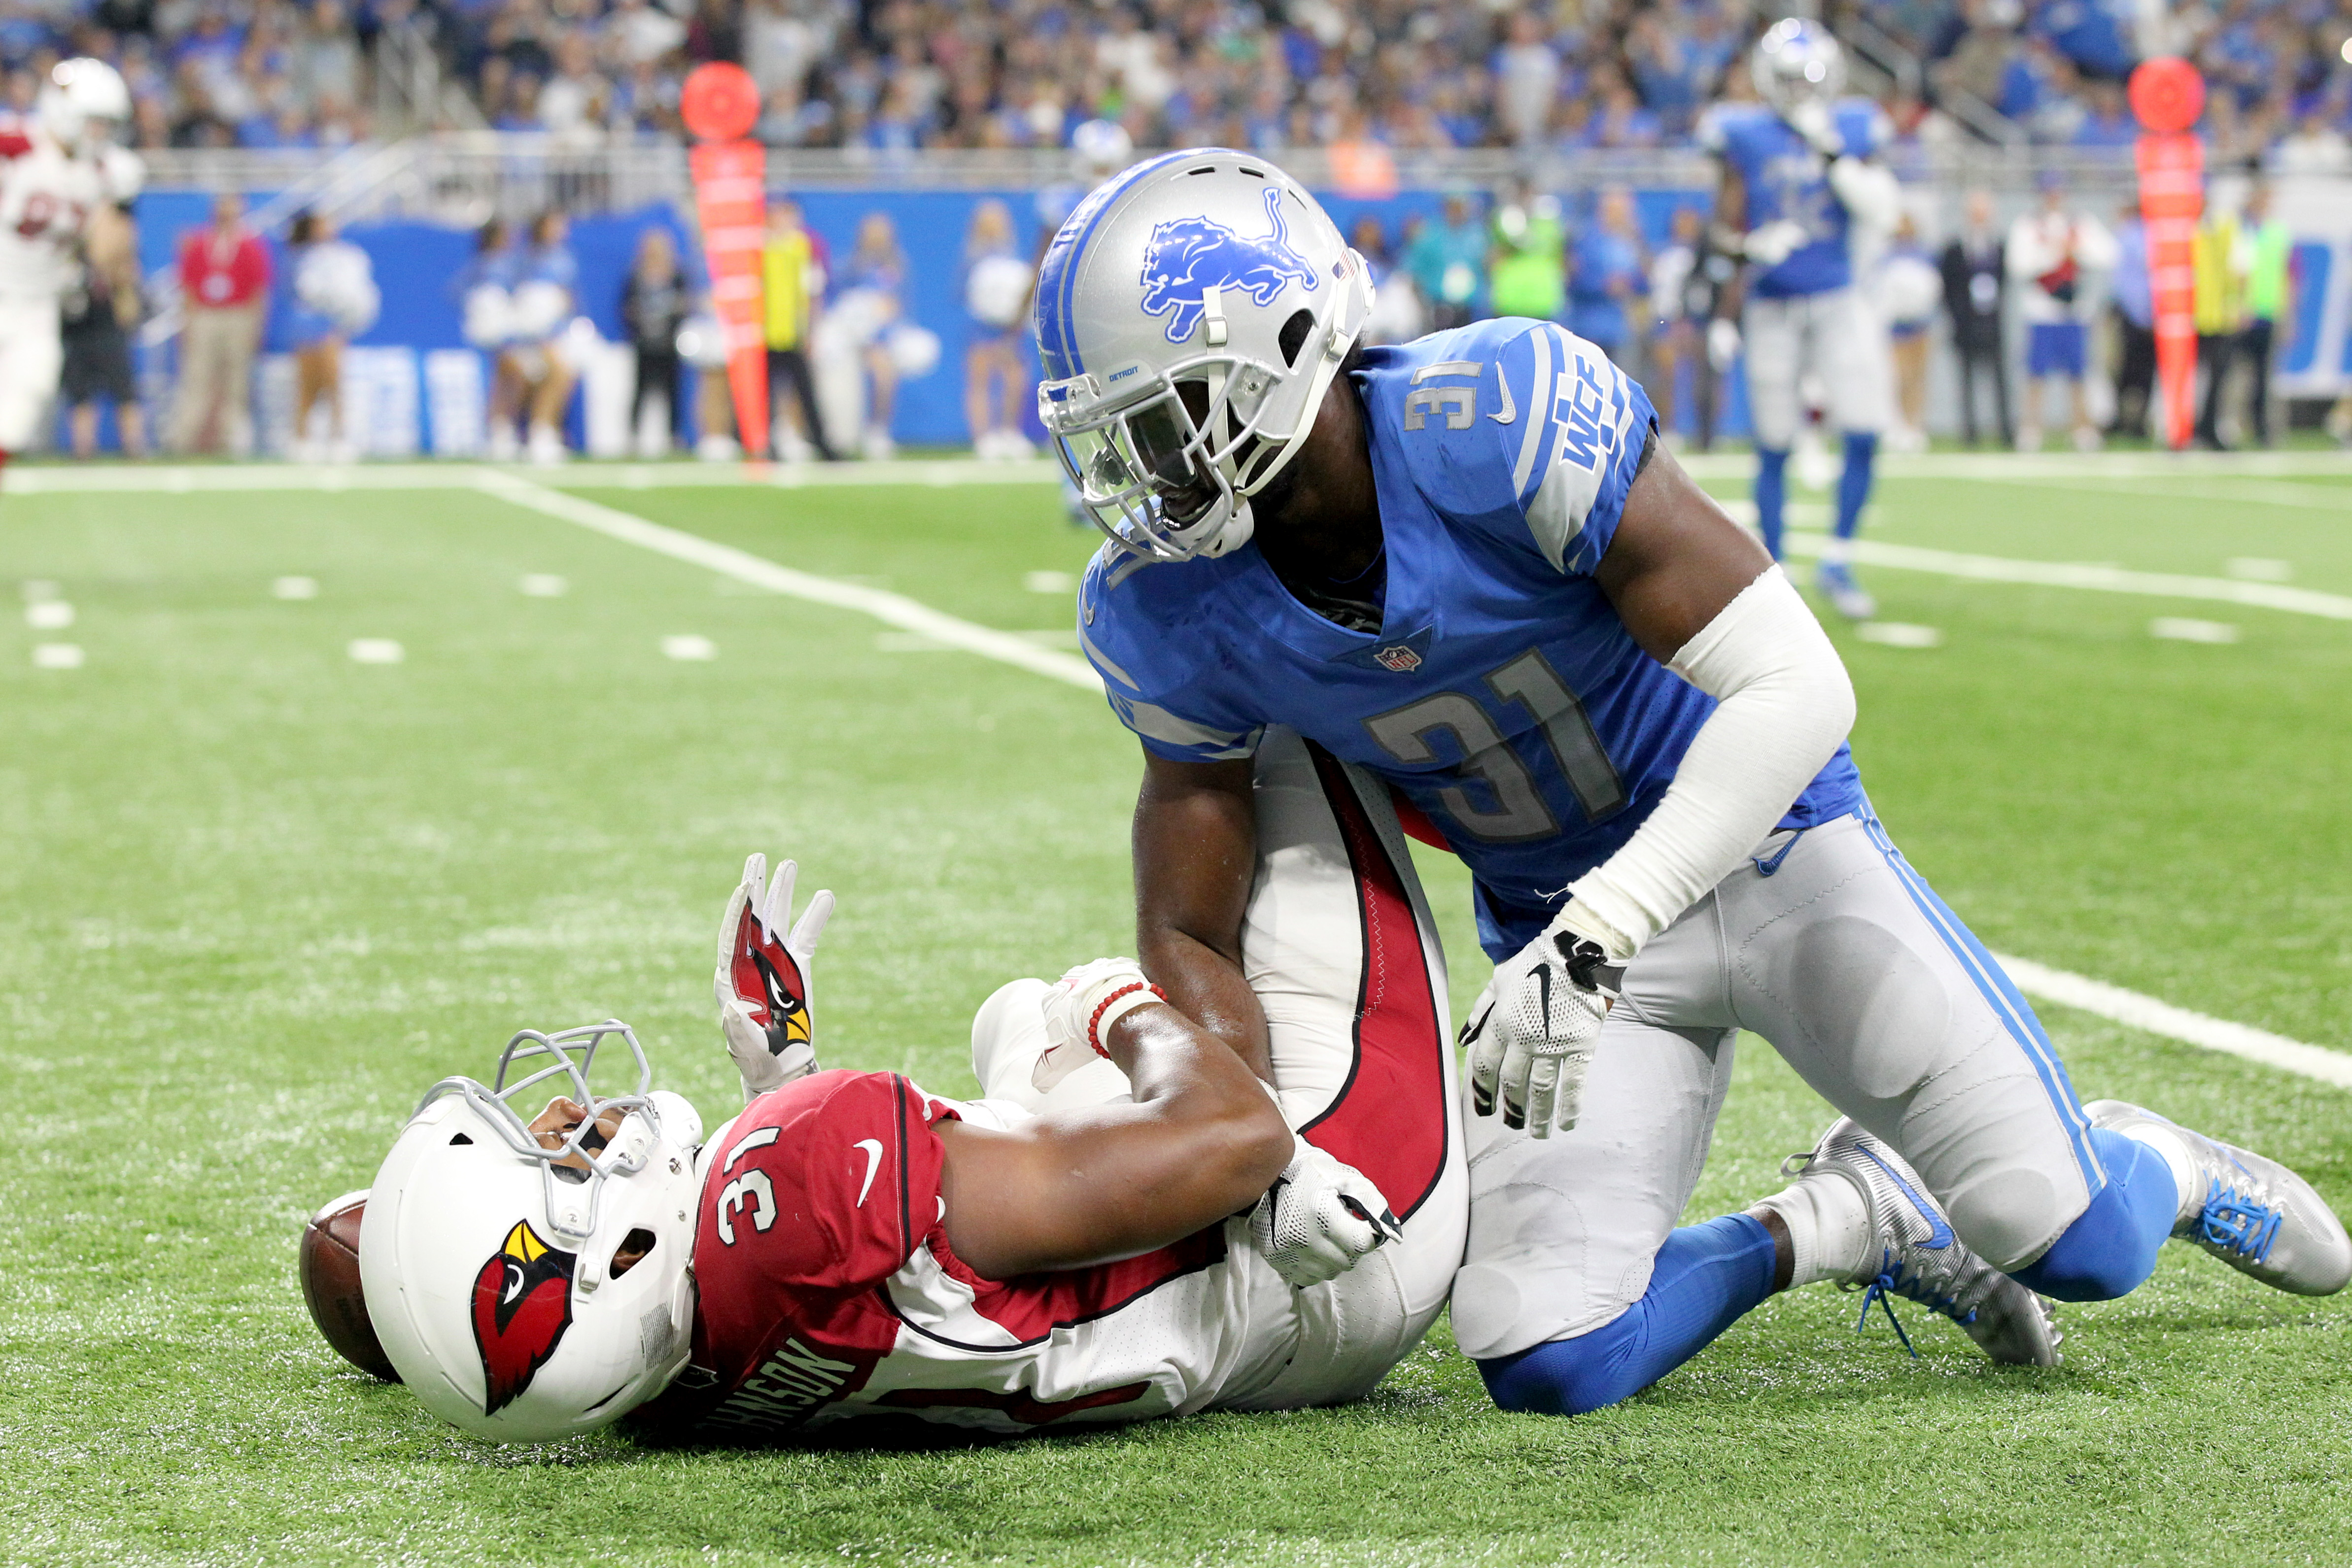 D.J. Hayden of the Detroit Lions tackling David Johnson of the Arizona Cardinals on September 10, 2017 in Detroit, Michigan | Source: Getty Images